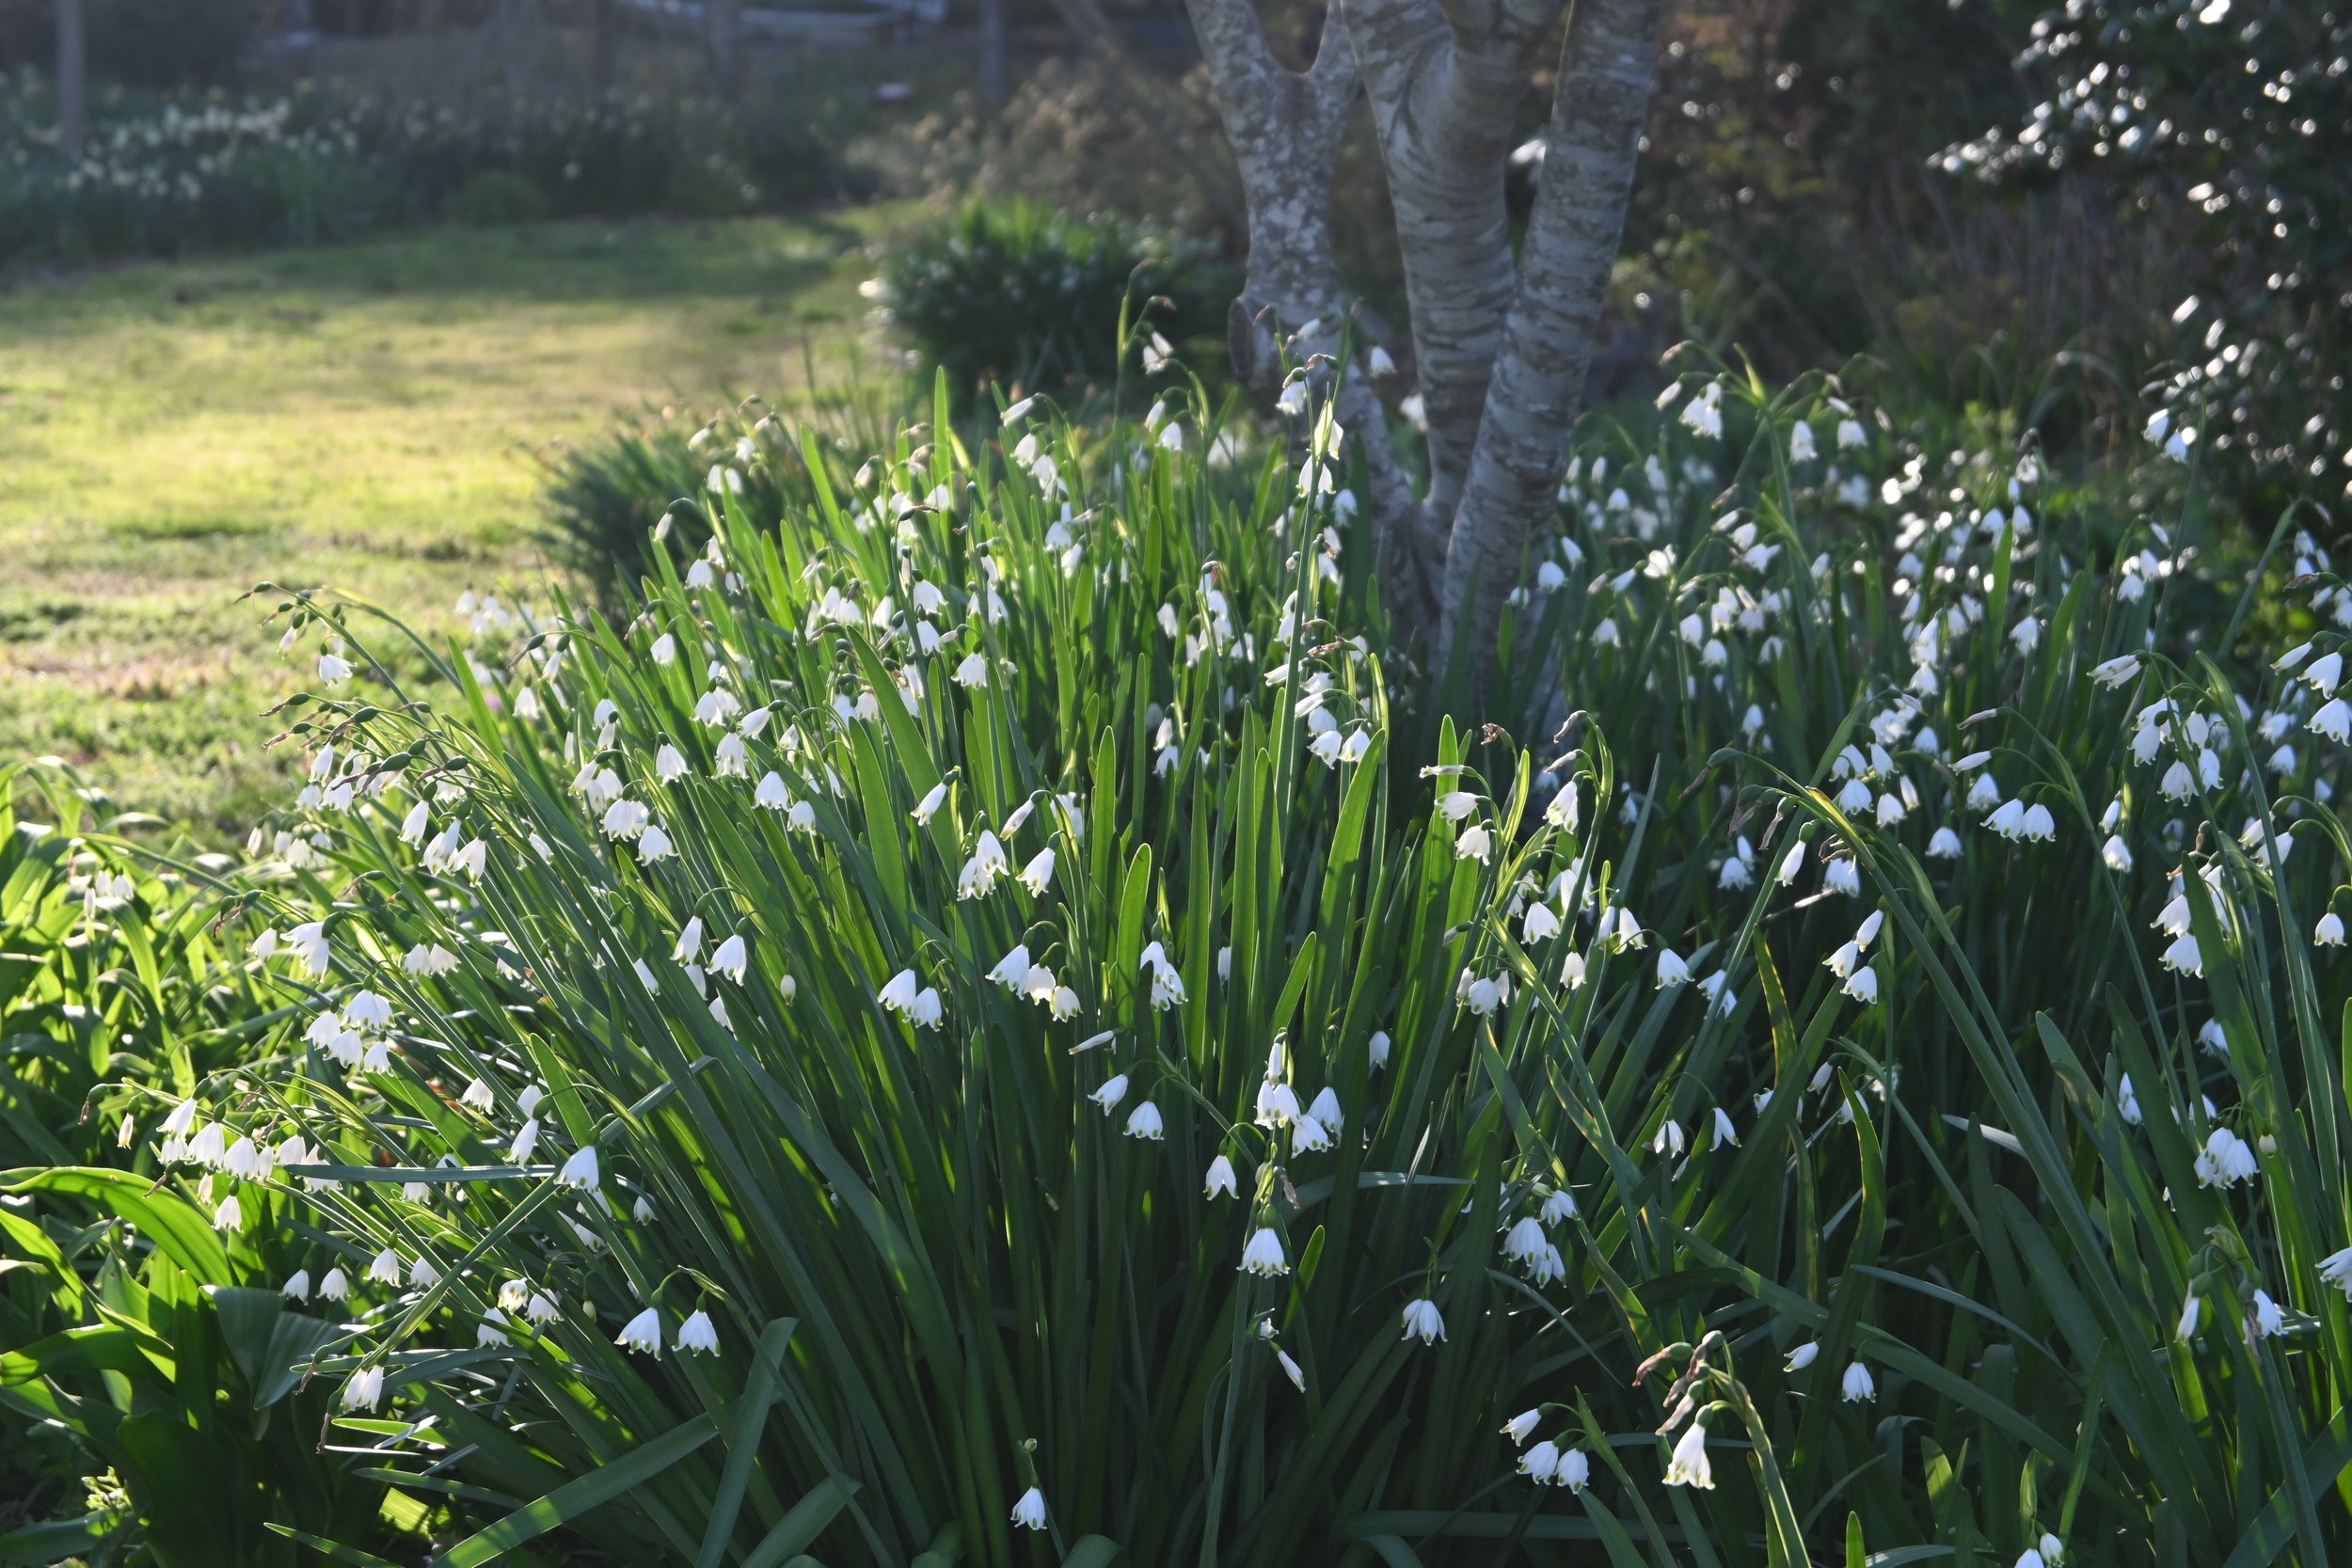   Leucojum  (snoflakes) is another spring flowering bulb in the gardens of Brent and Becky’s.  